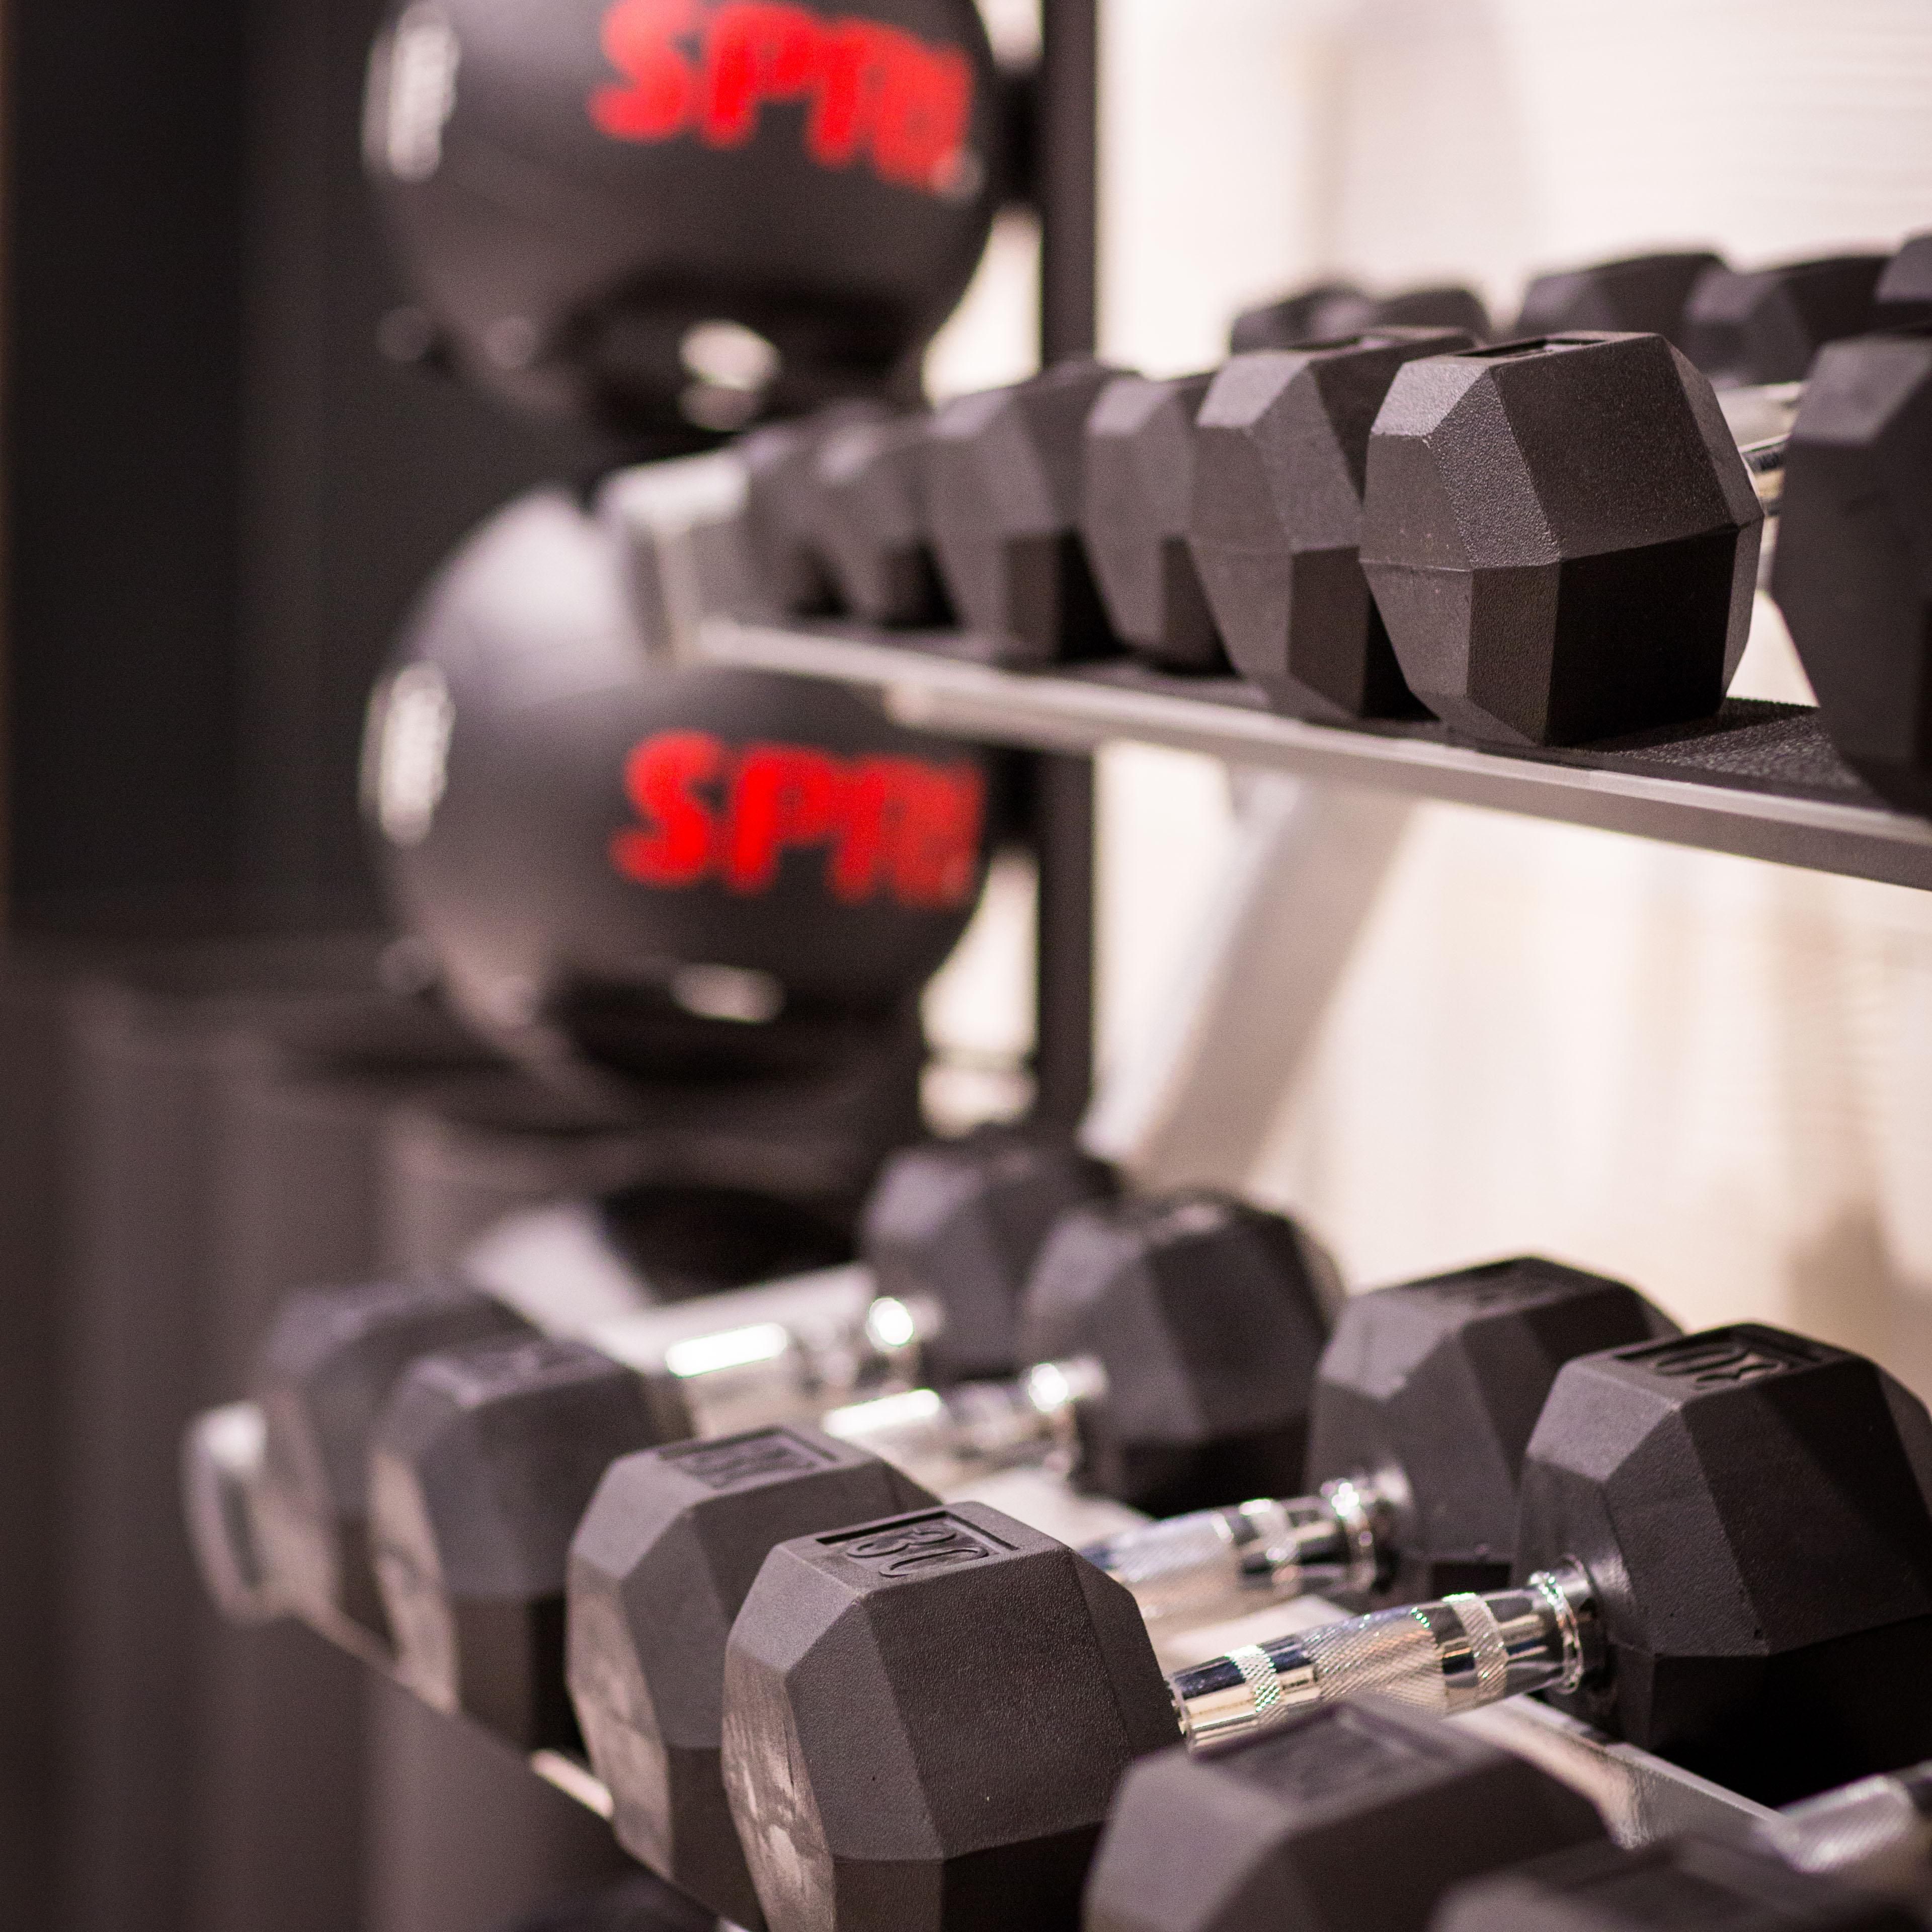 Free weights, core balls and much more